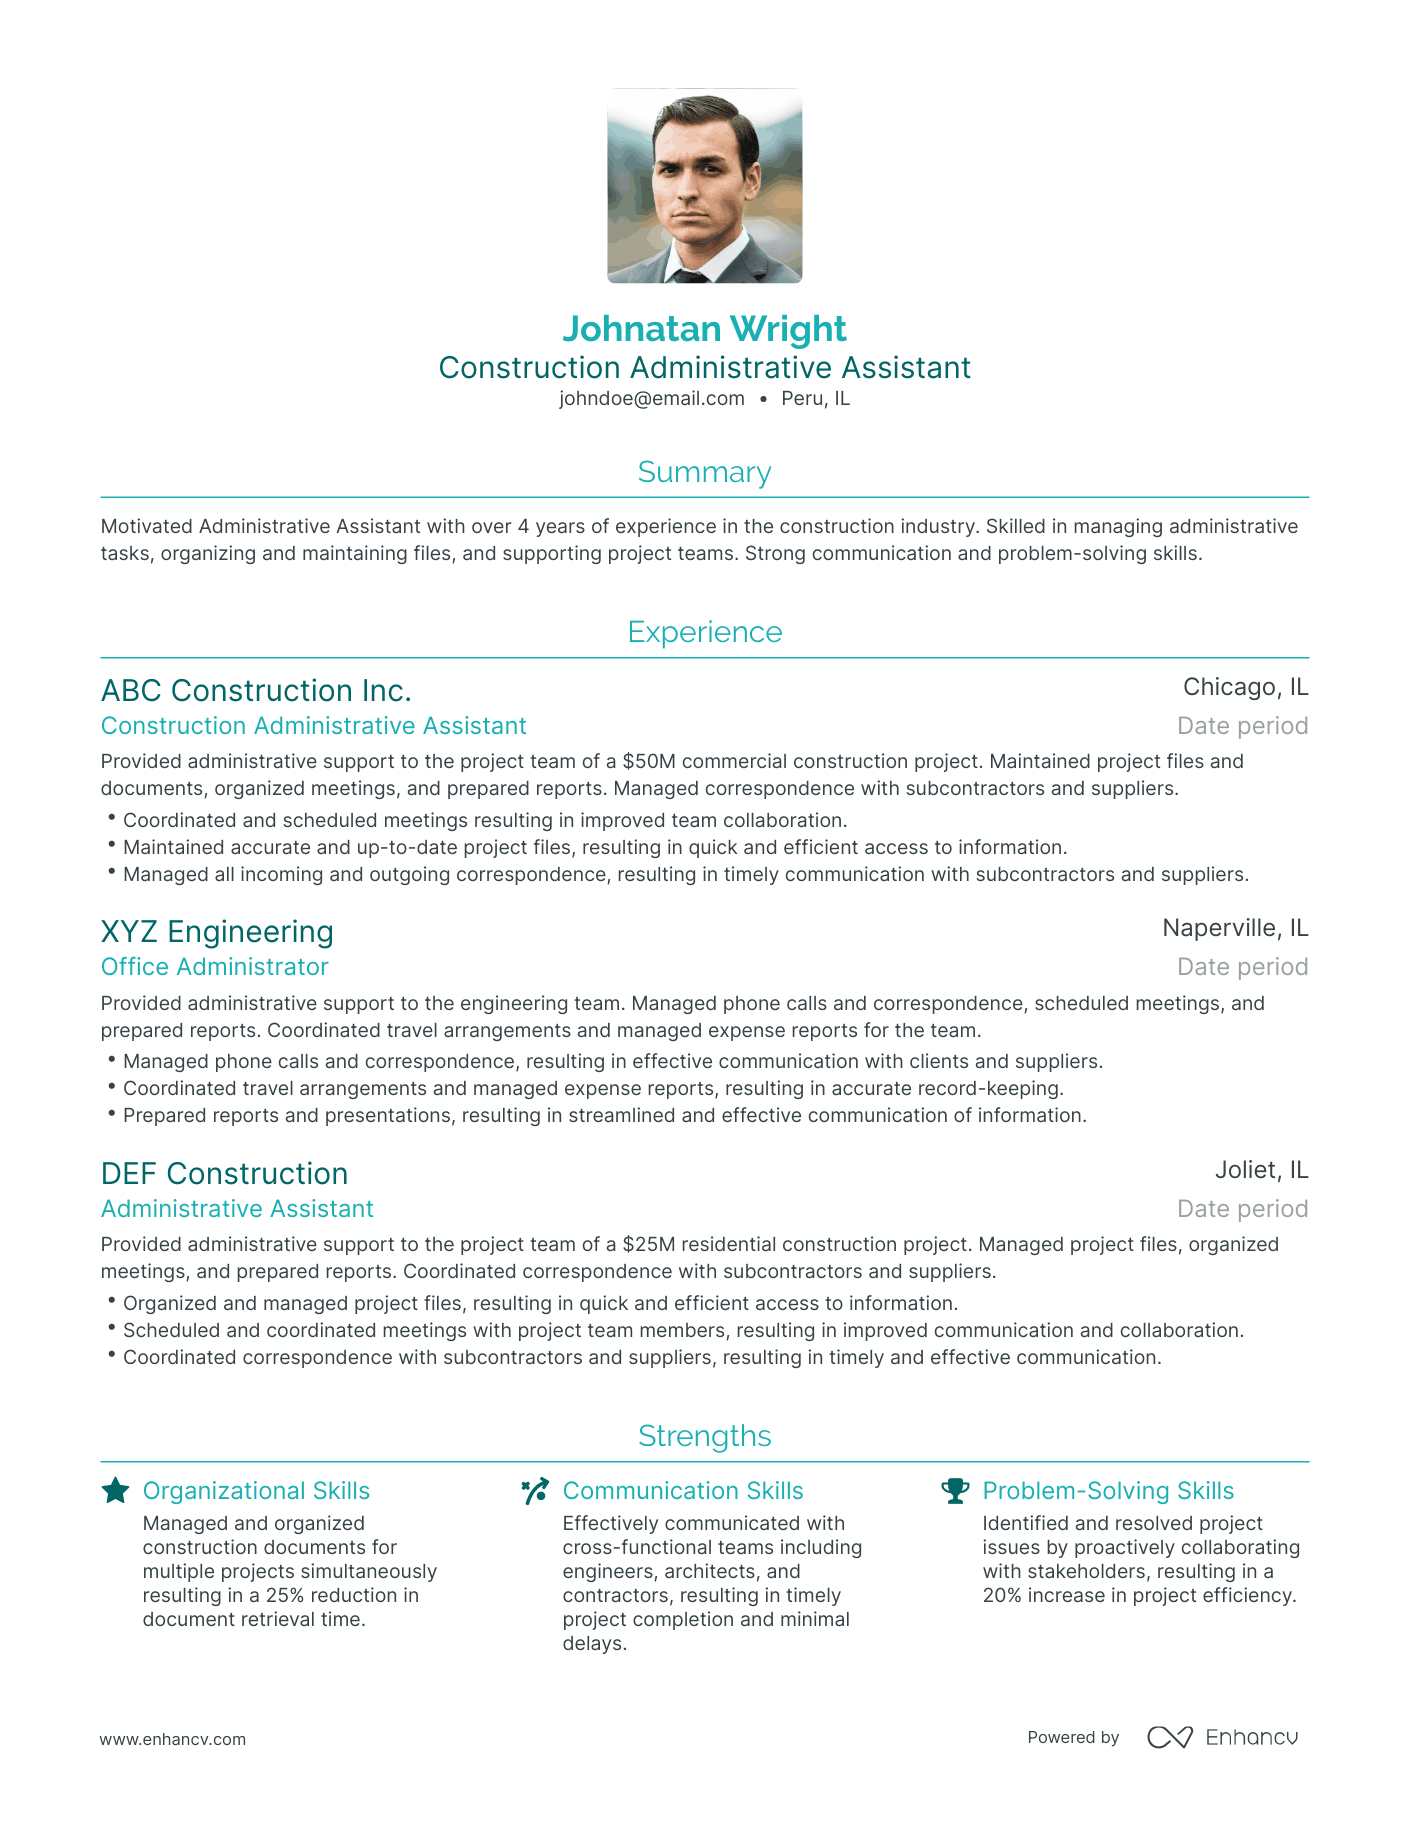 Traditional Construction Administrative Assistant Resume Template